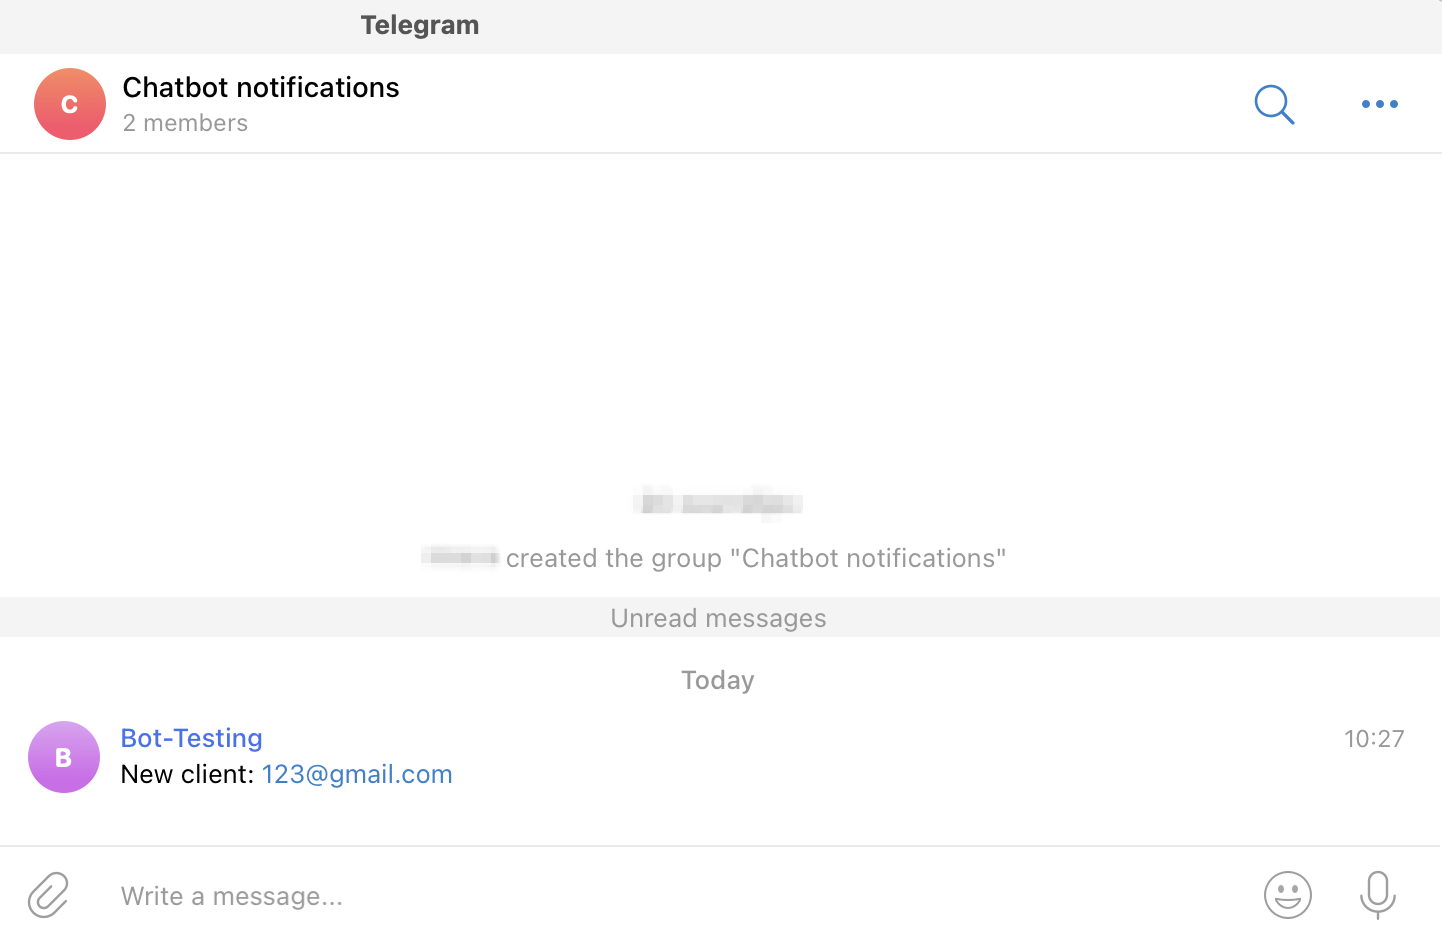 A notification in the Telegram group with a client’s email 